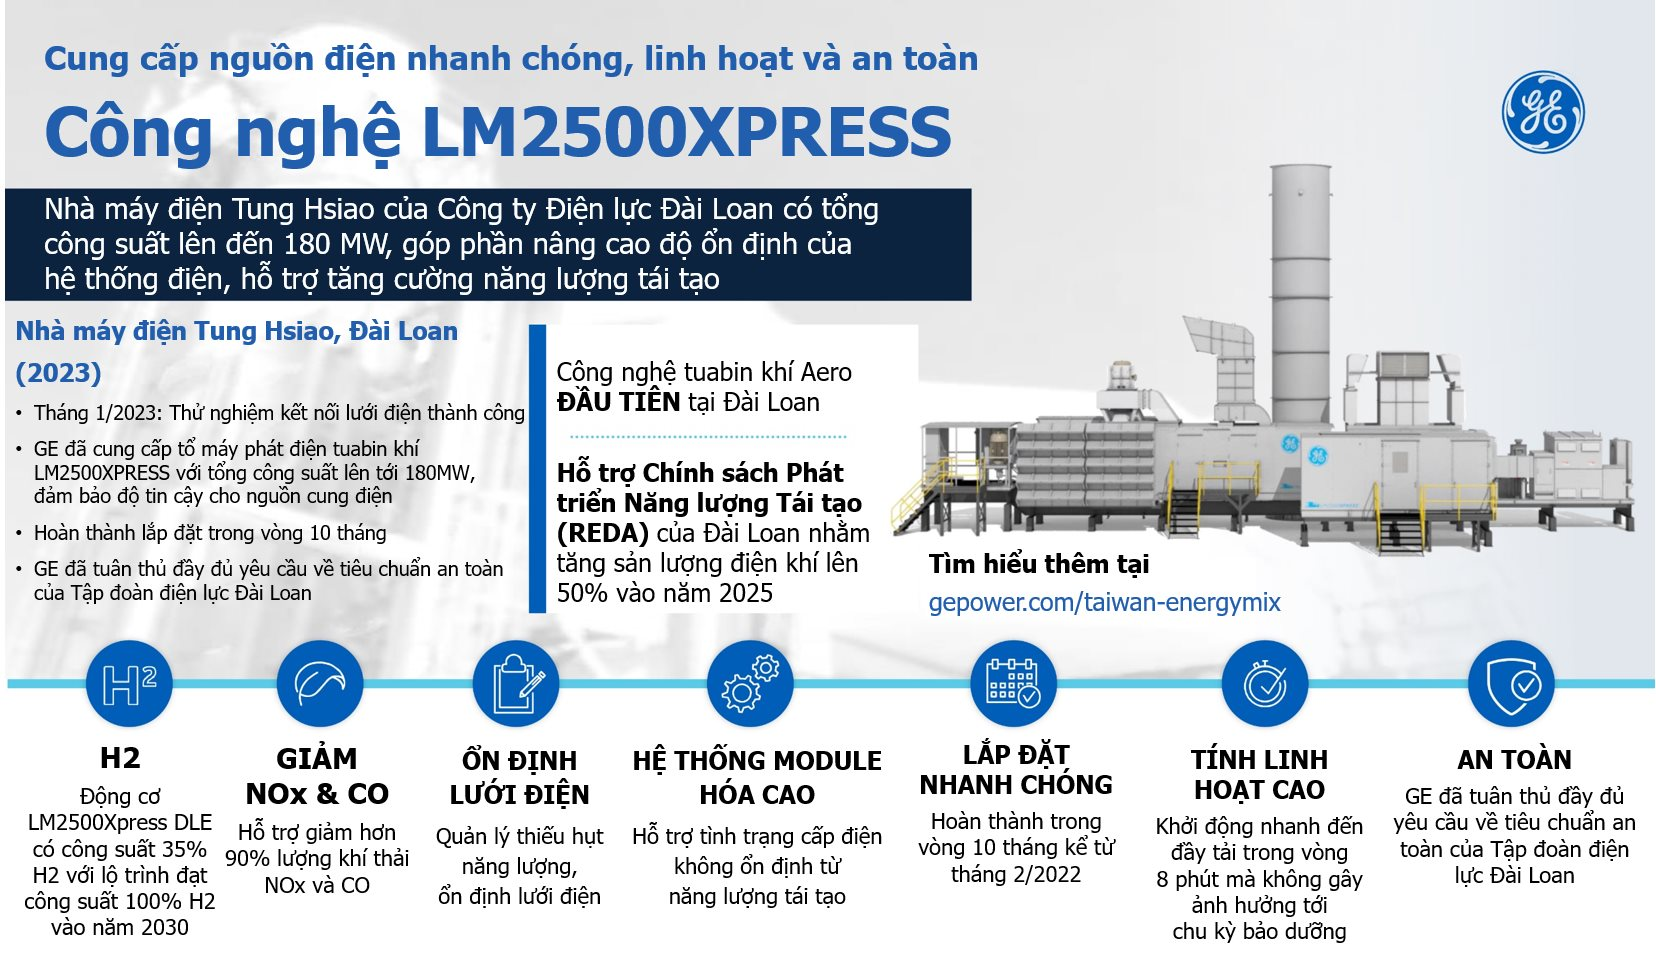 infographic_cong-nghe-lm2500xpress.png